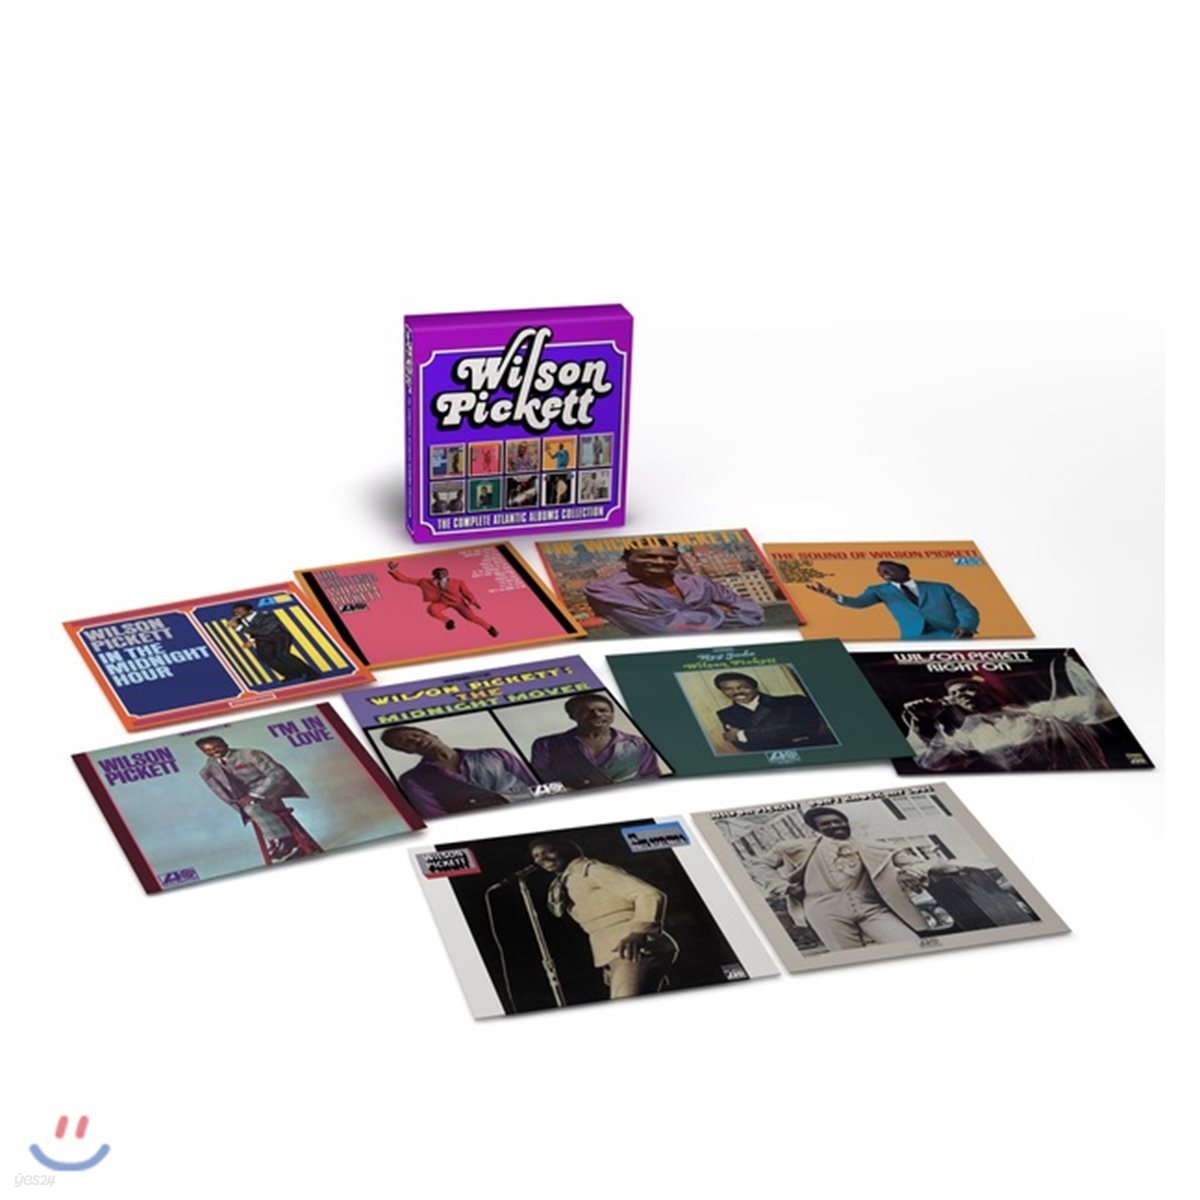 Wilson Pickett (윌슨 피켓) - The Complete Atlantic Albums Collection [Deluxe Edition]